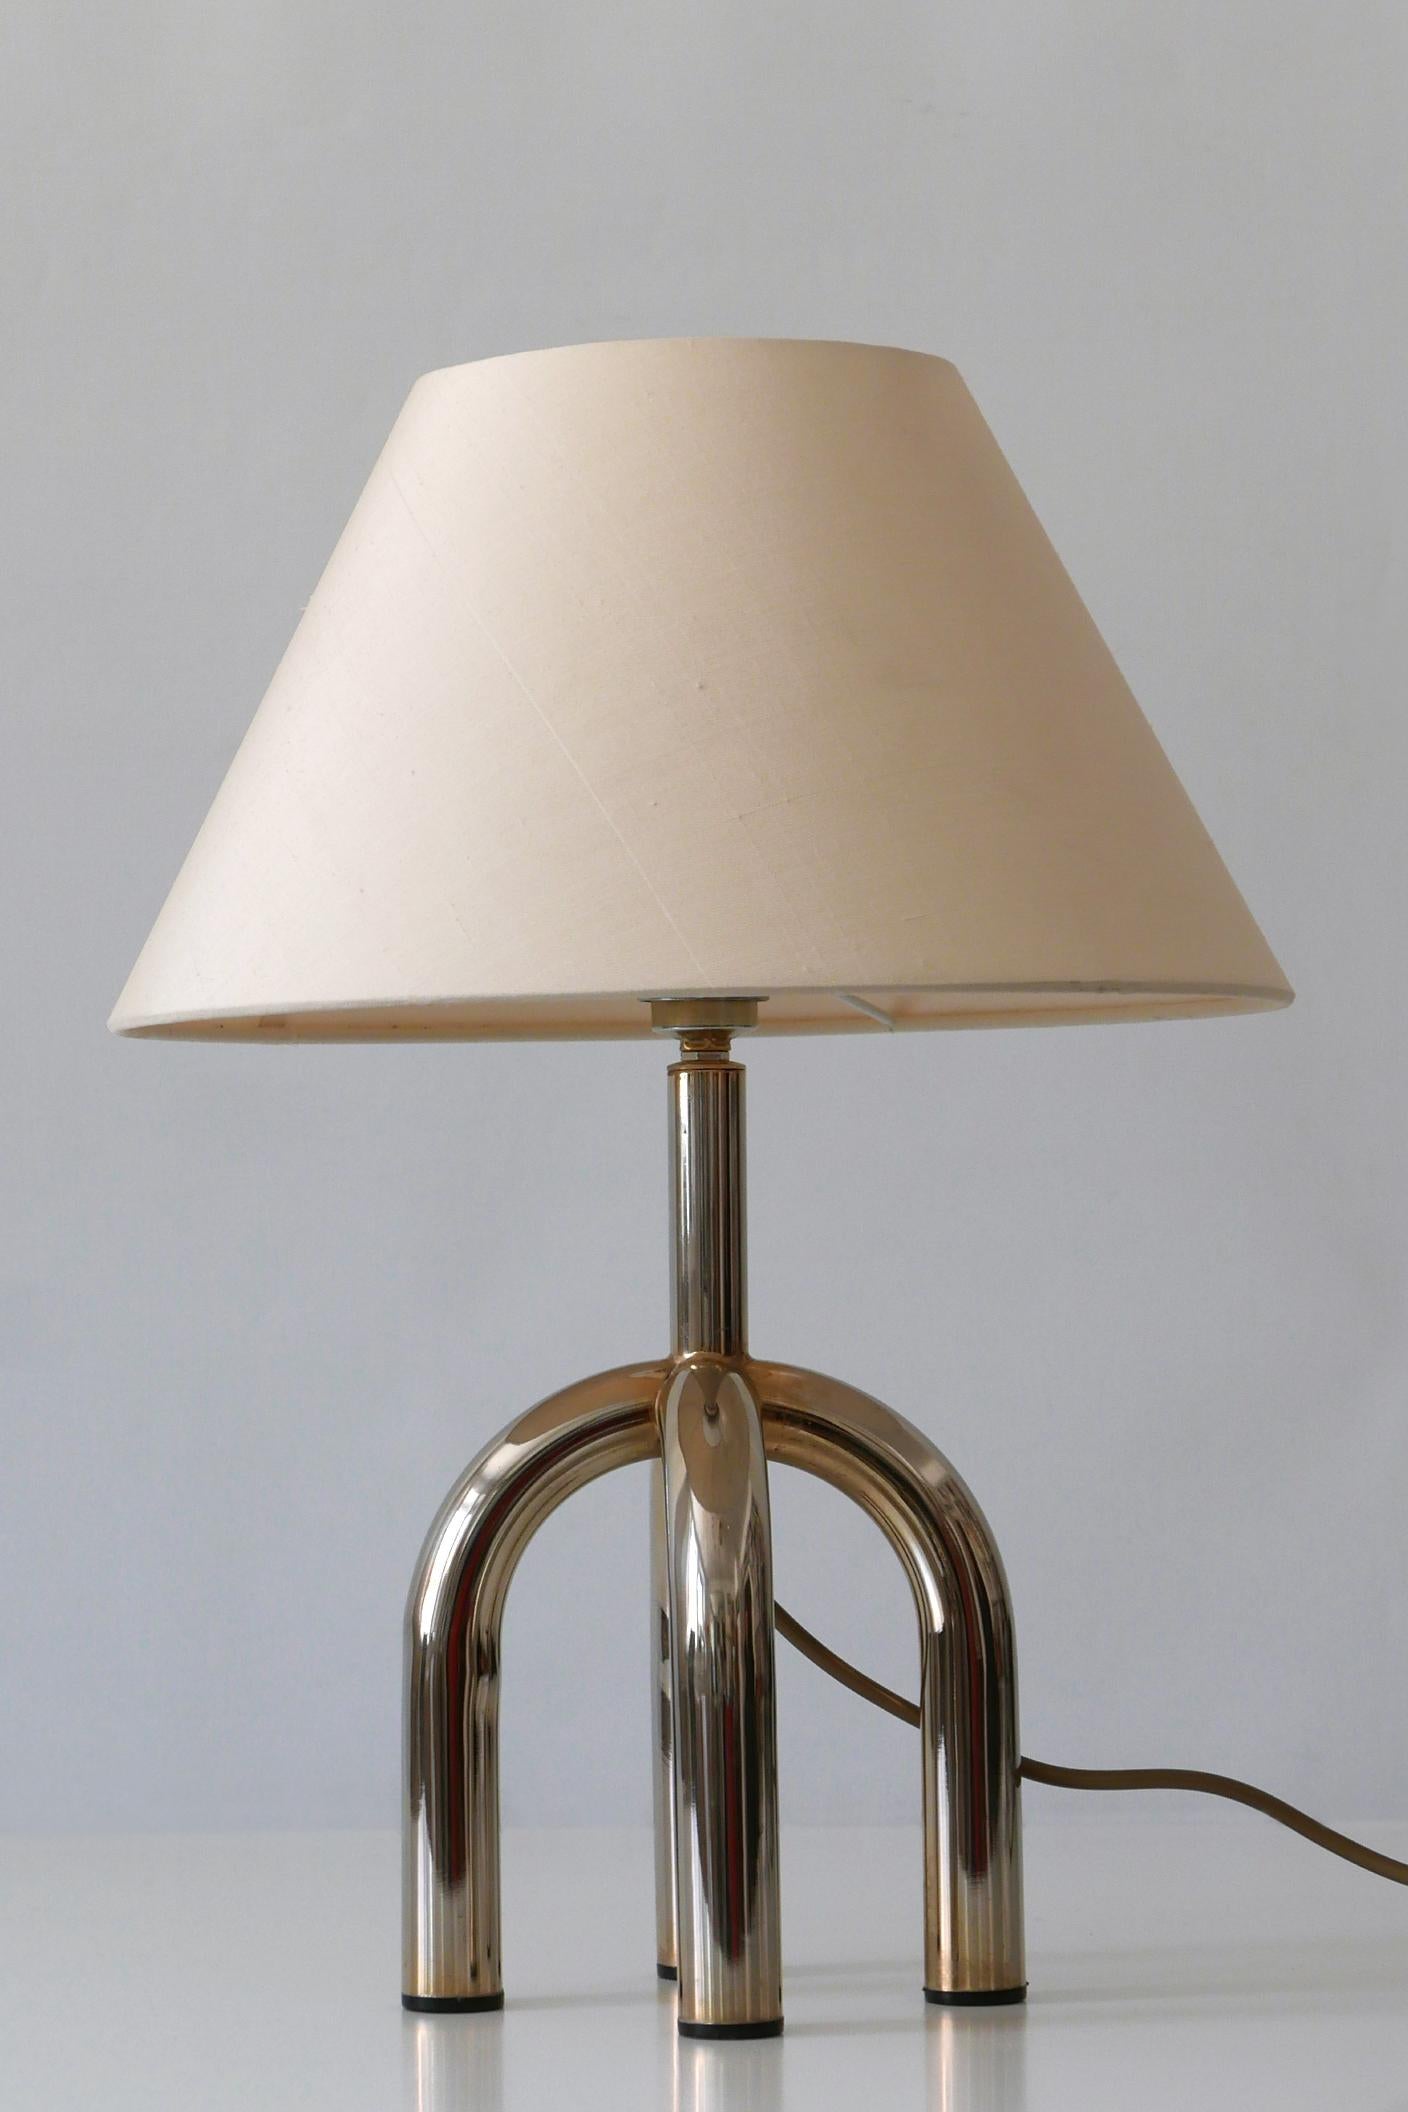 Set of Two Elegant Mid-Century Modern Table Lamps, 1970s, Germany 3